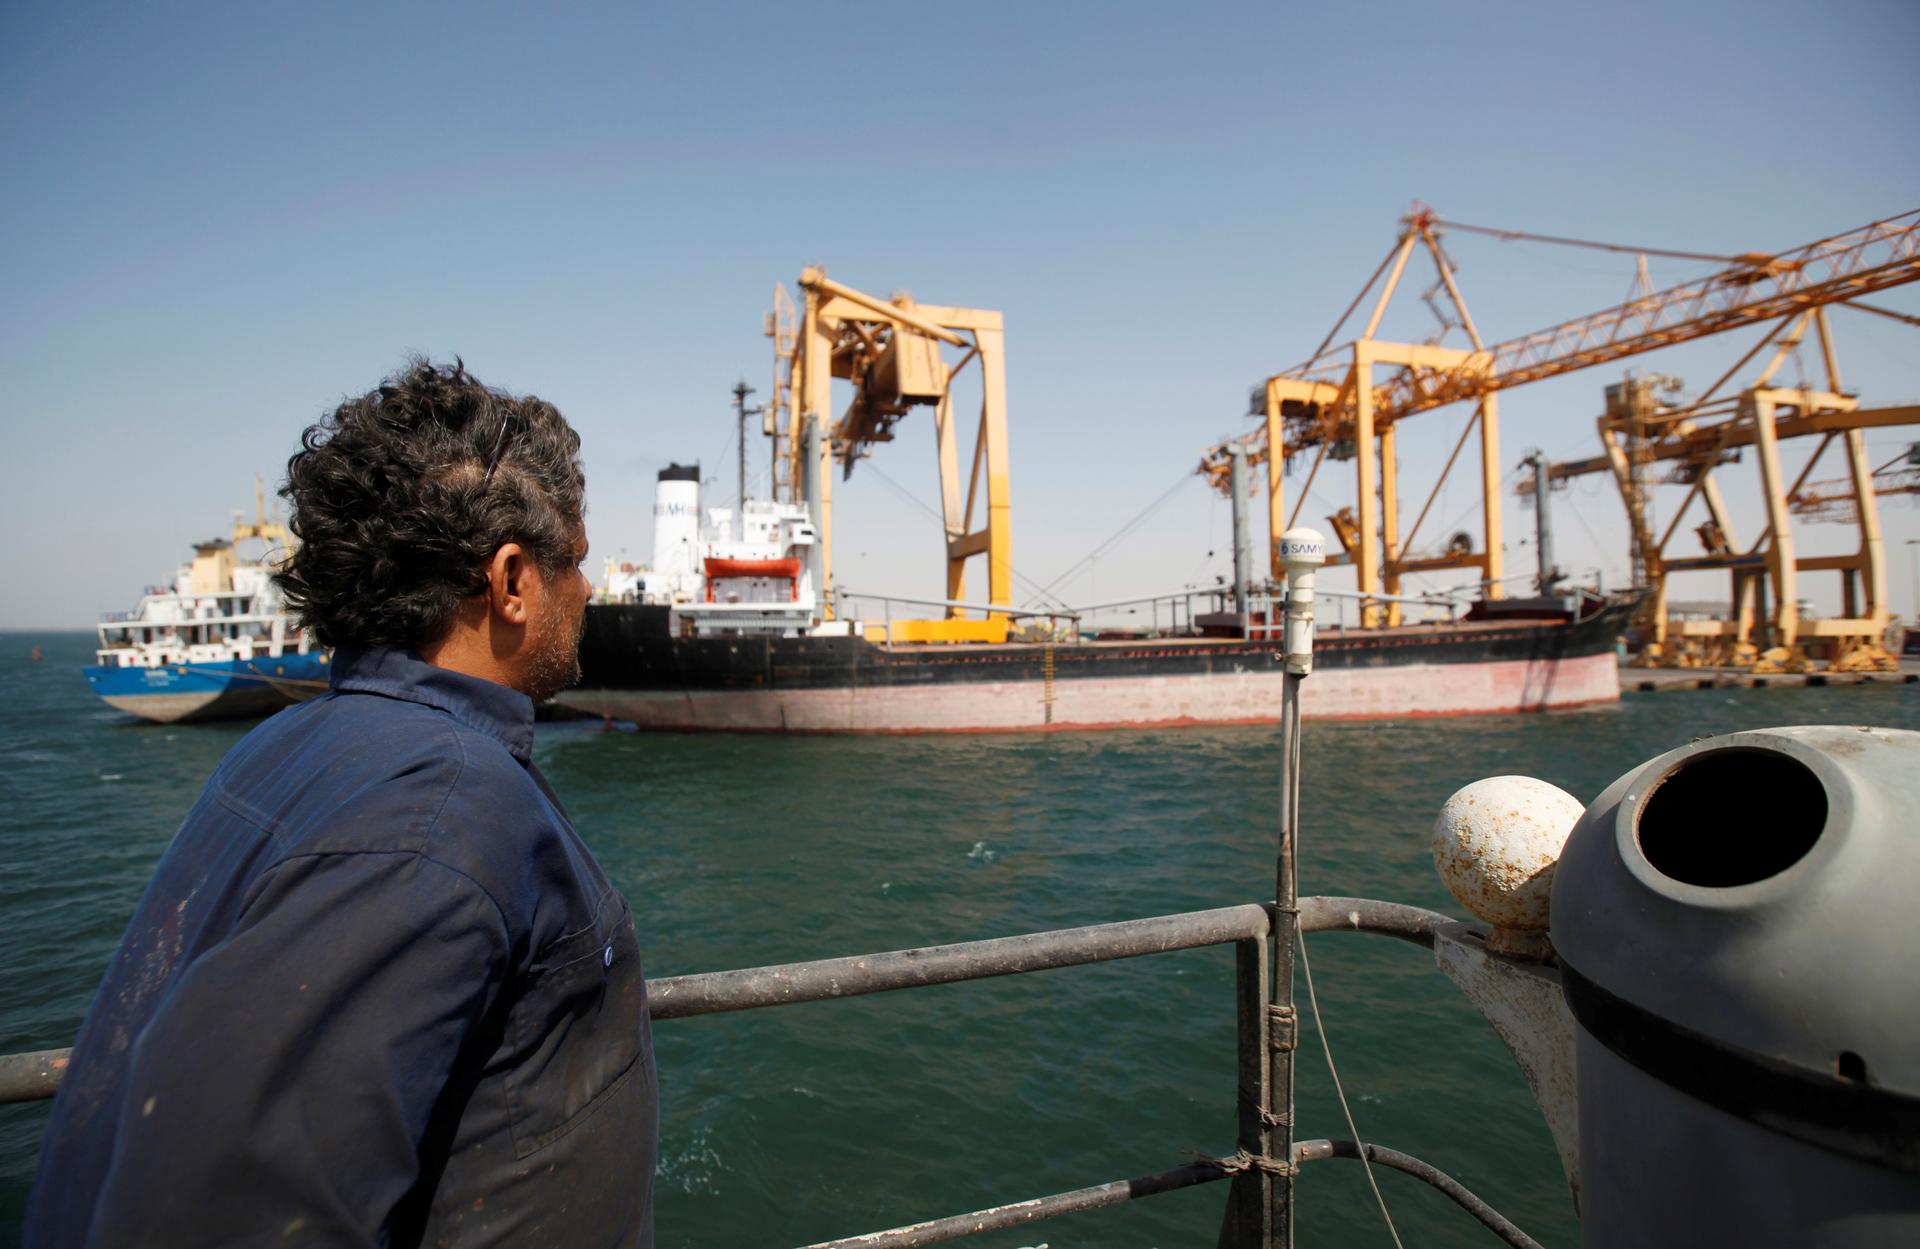 A Yemeni sailor looks at giant cranes, damaged by Saudi-led air strikes, at a container terminal at the Red Sea port of Hodeidah, Yemen